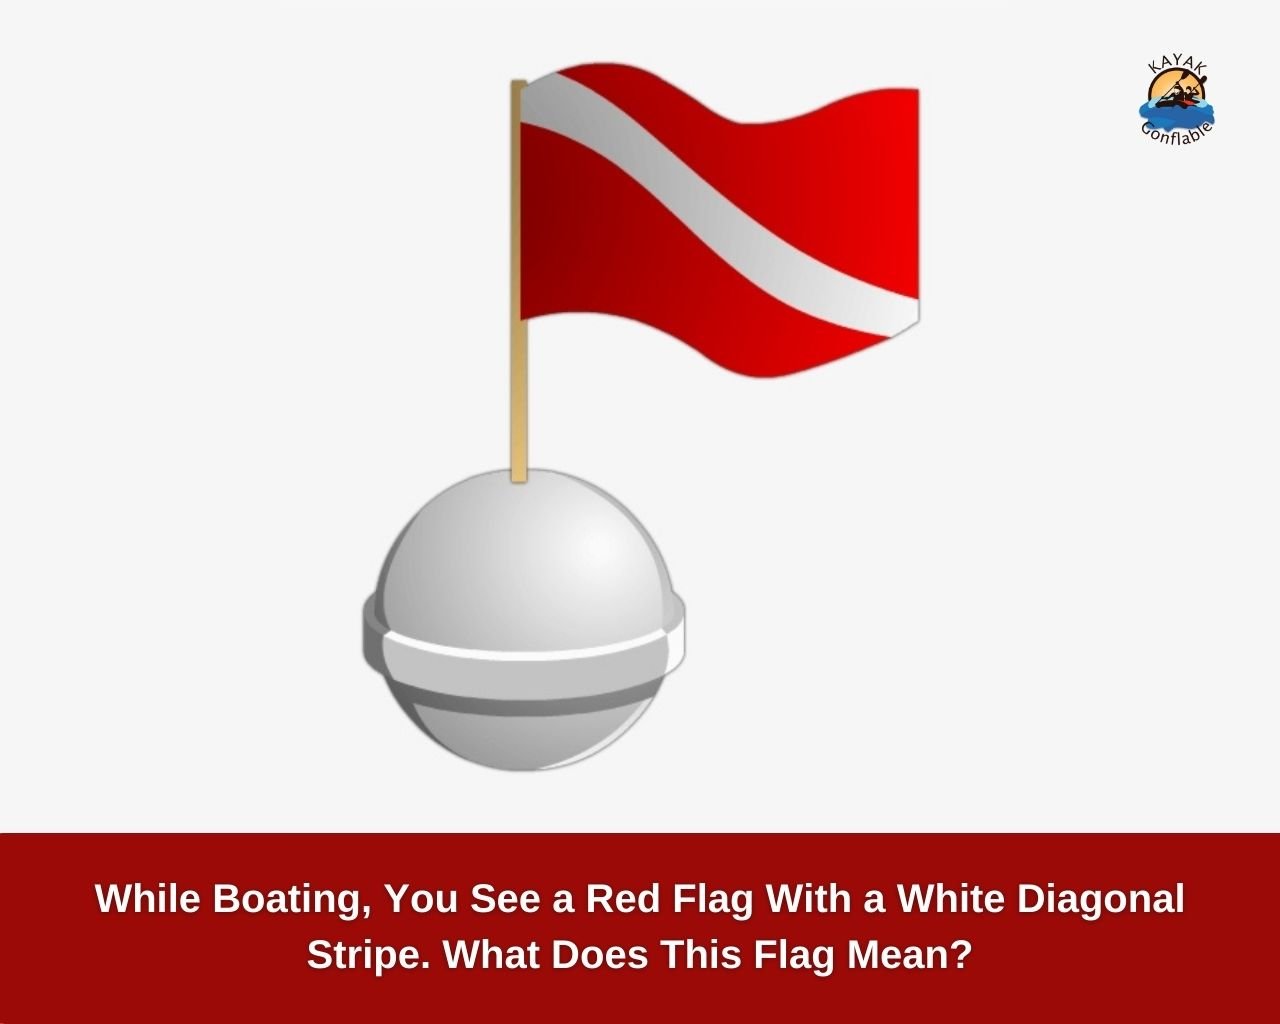 While Boating, You See a Red Flag With a White Diagonal Stripe. What Does This Flag Mean_